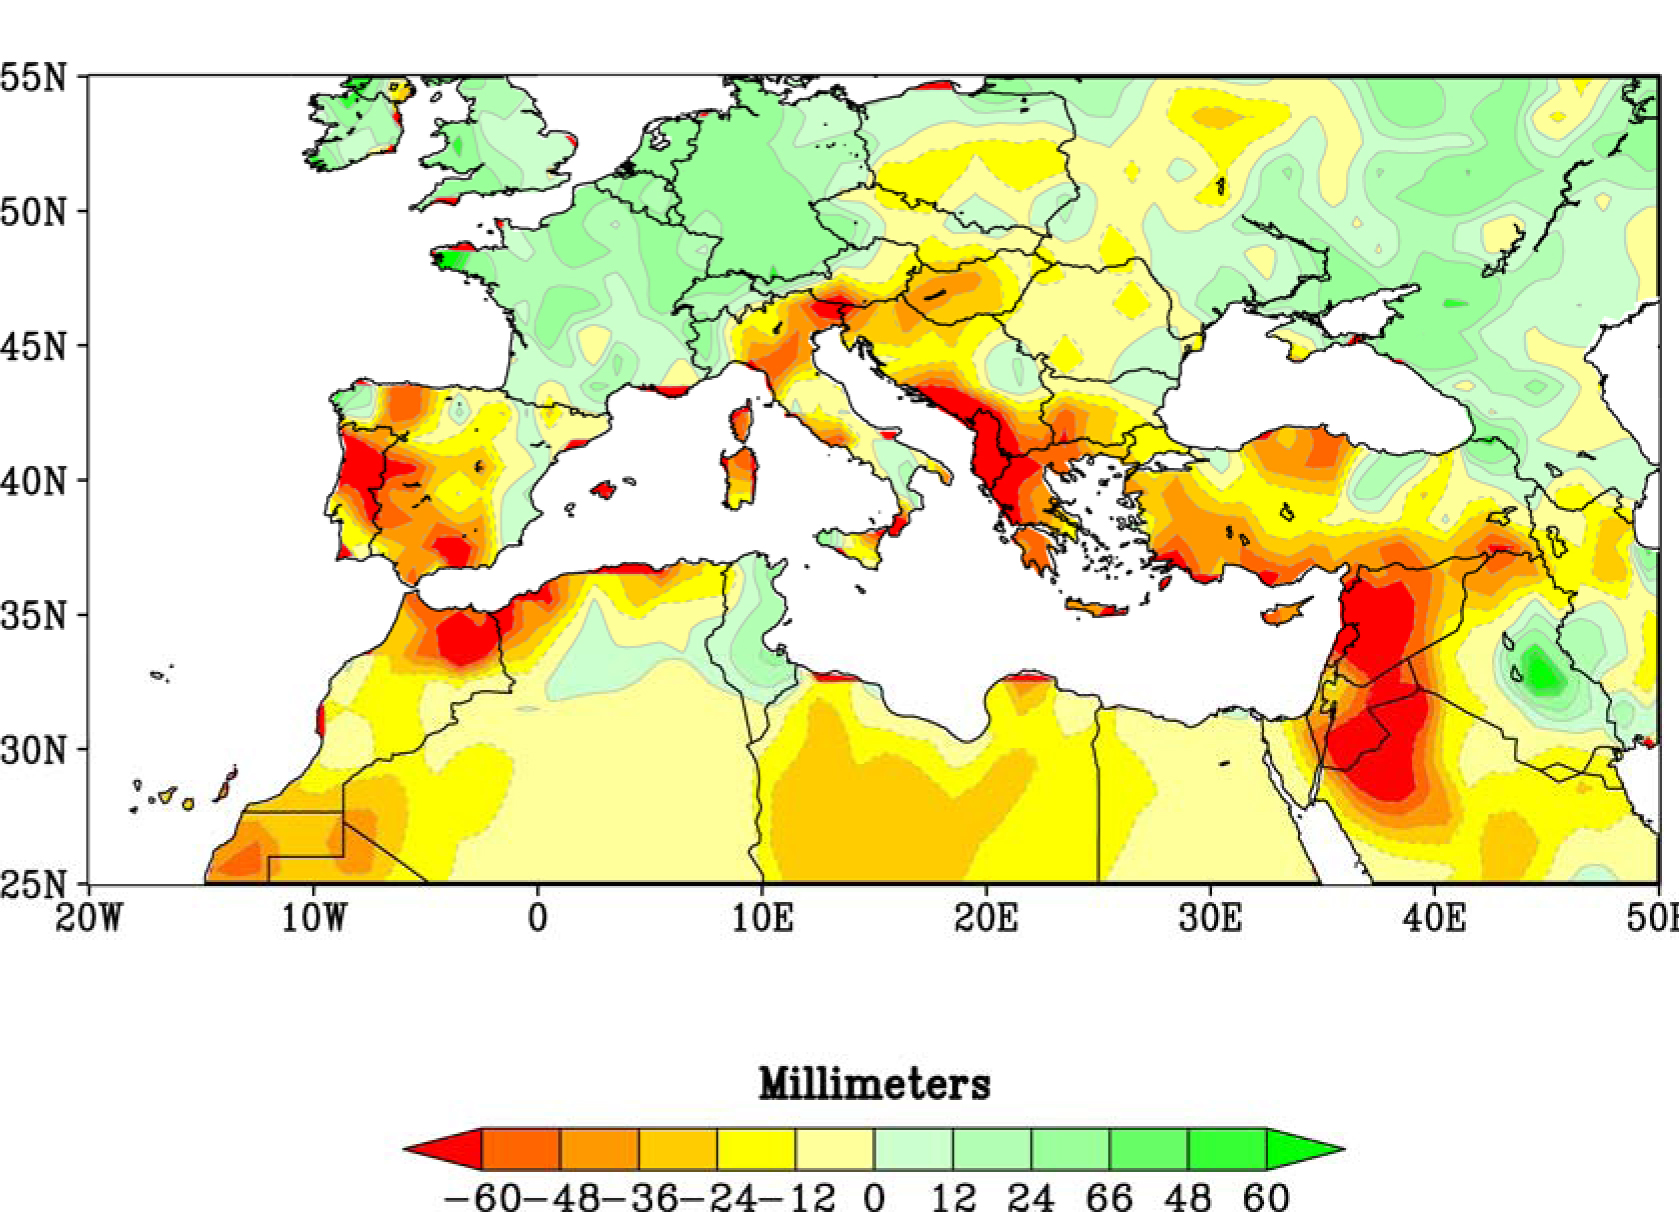 Frequent Mediterranean droughts caused by human impact on climate change